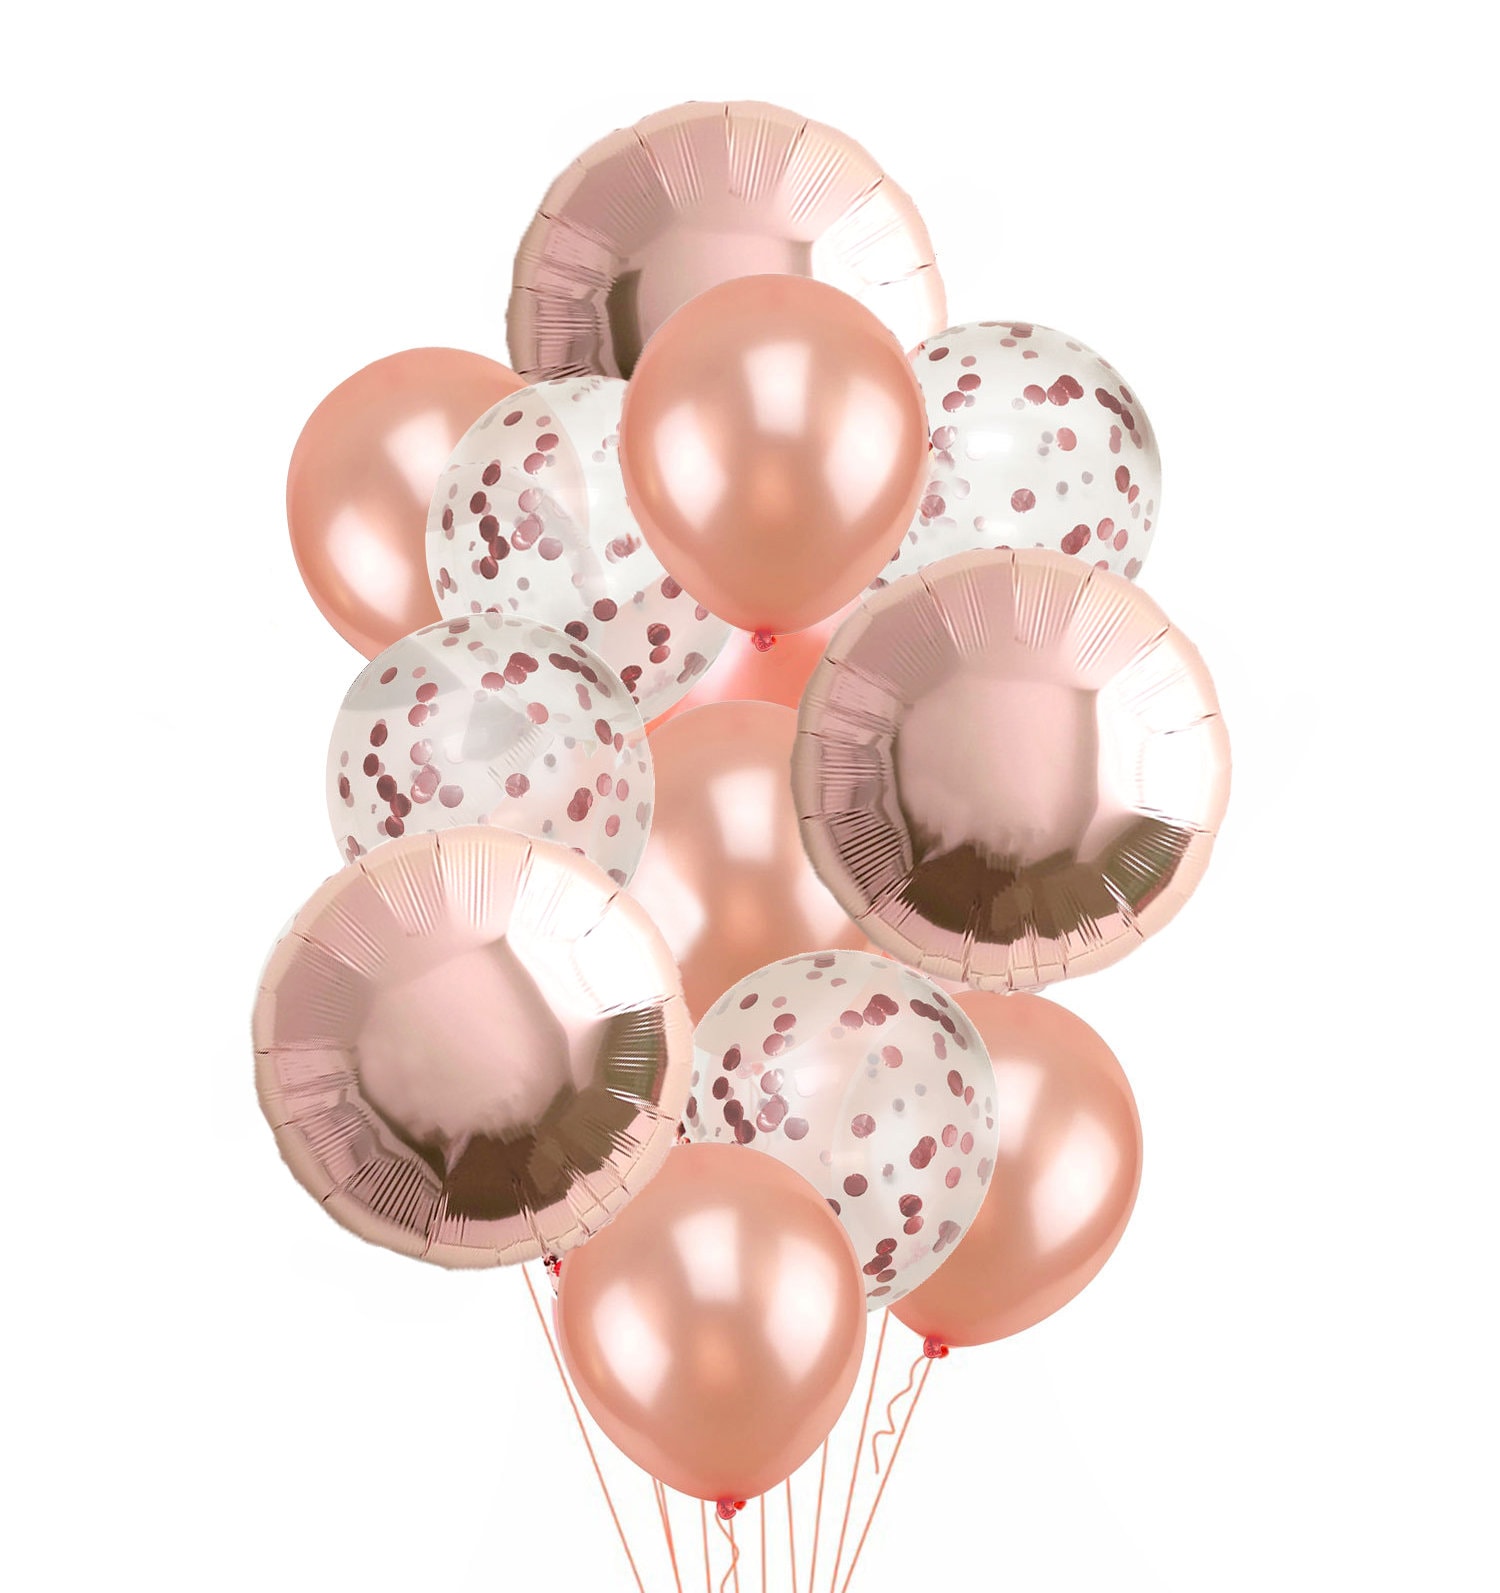 ROSE GOLD BALLOON Bouquet-Rose Gold Confetti Balloons, Girls Baby Shower  Balloons, Rose Fall Wedding Balloons, Girls Birthday Party Balloons